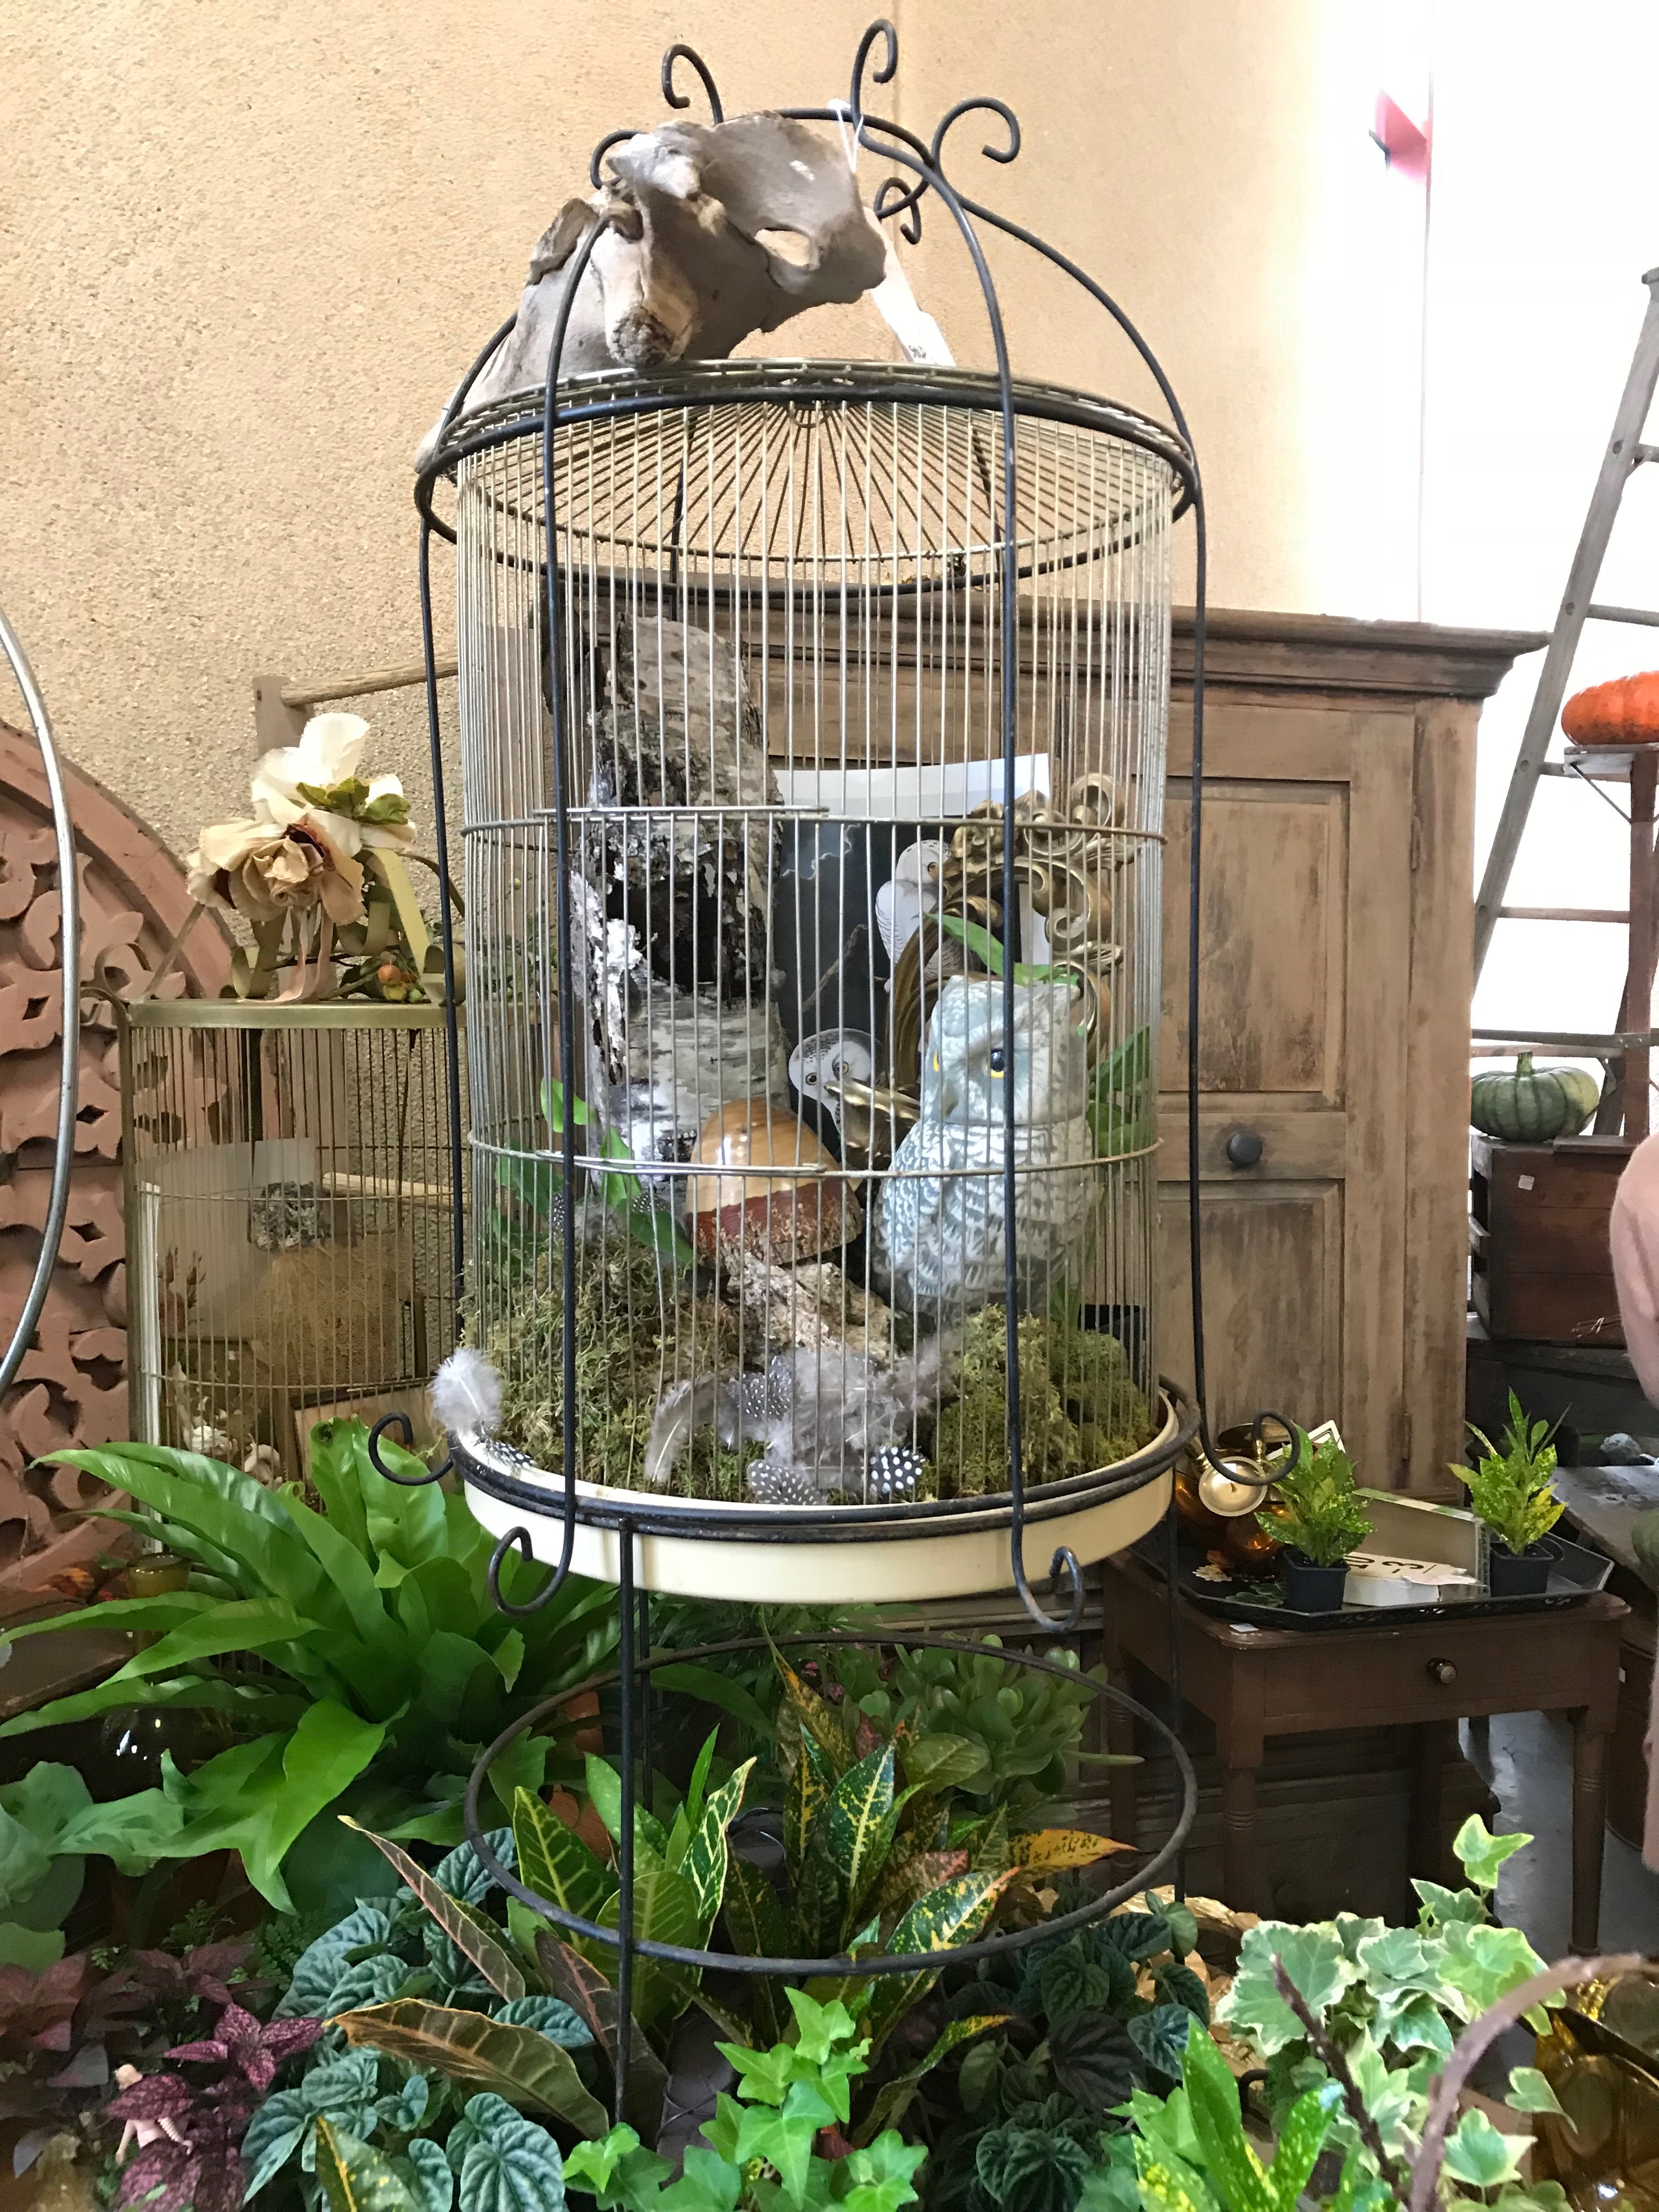 Birdcage filled with whimsical items